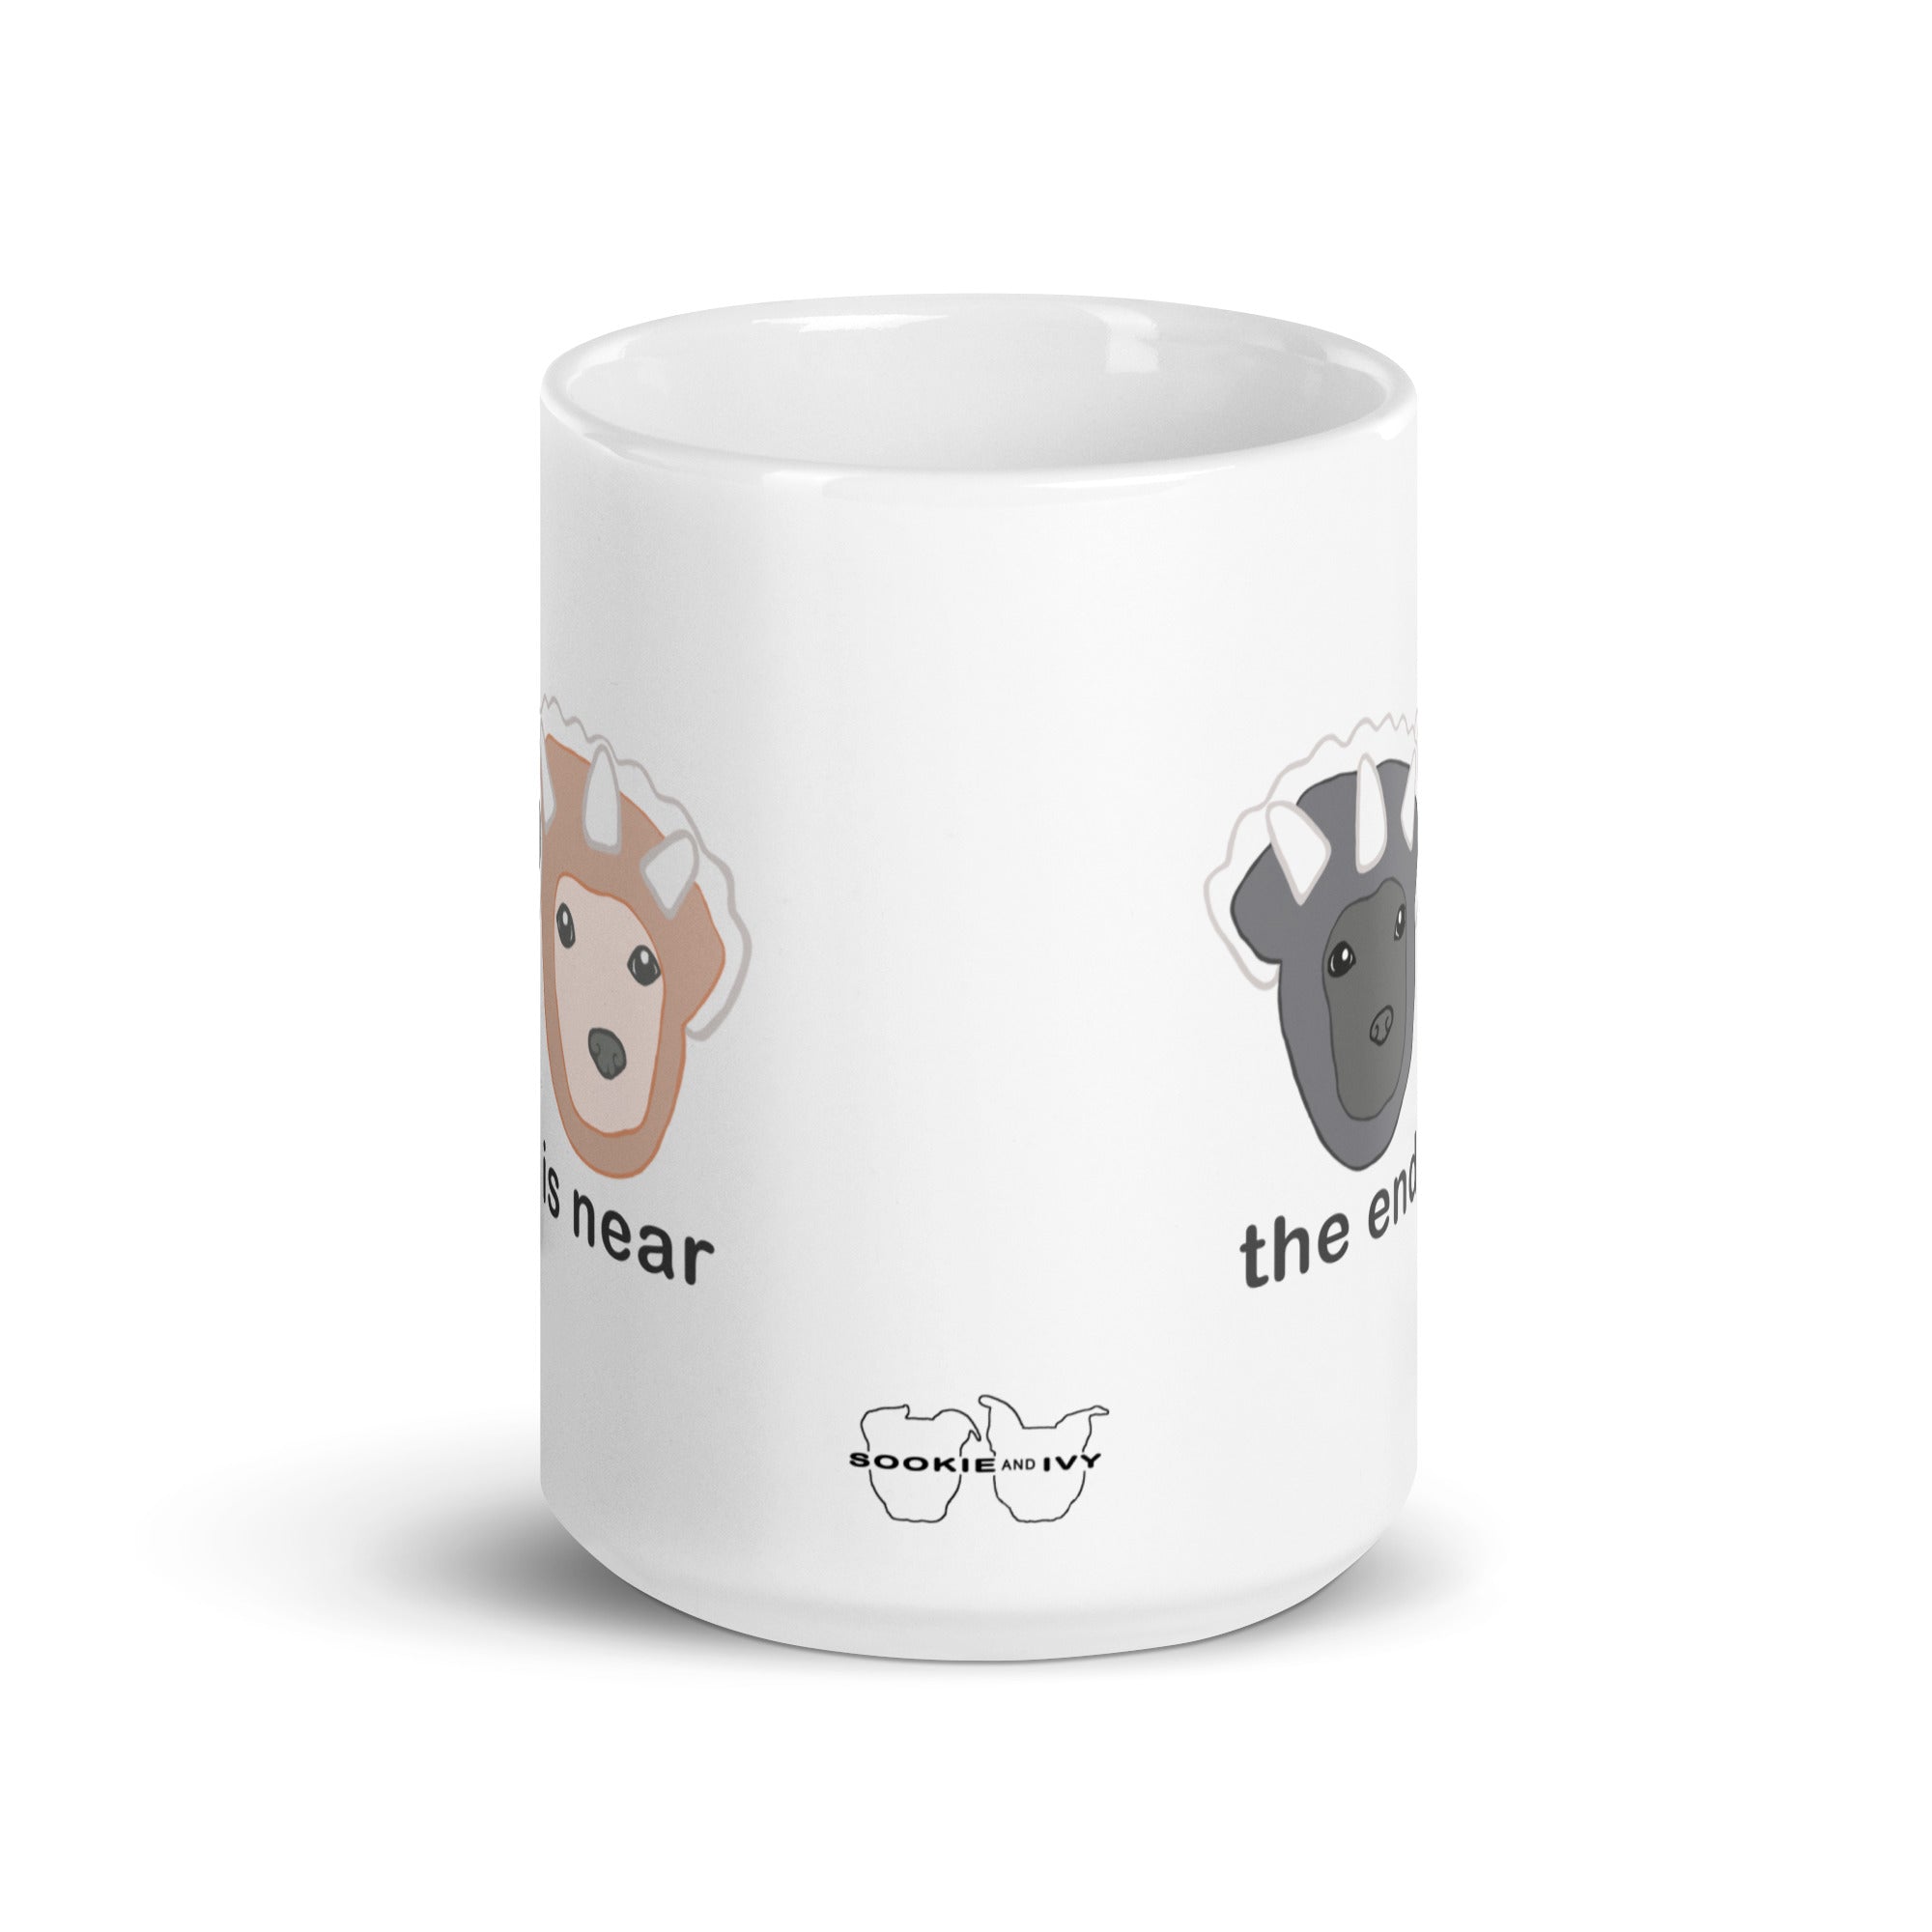 "The End is Near" Triceratops White glossy mug